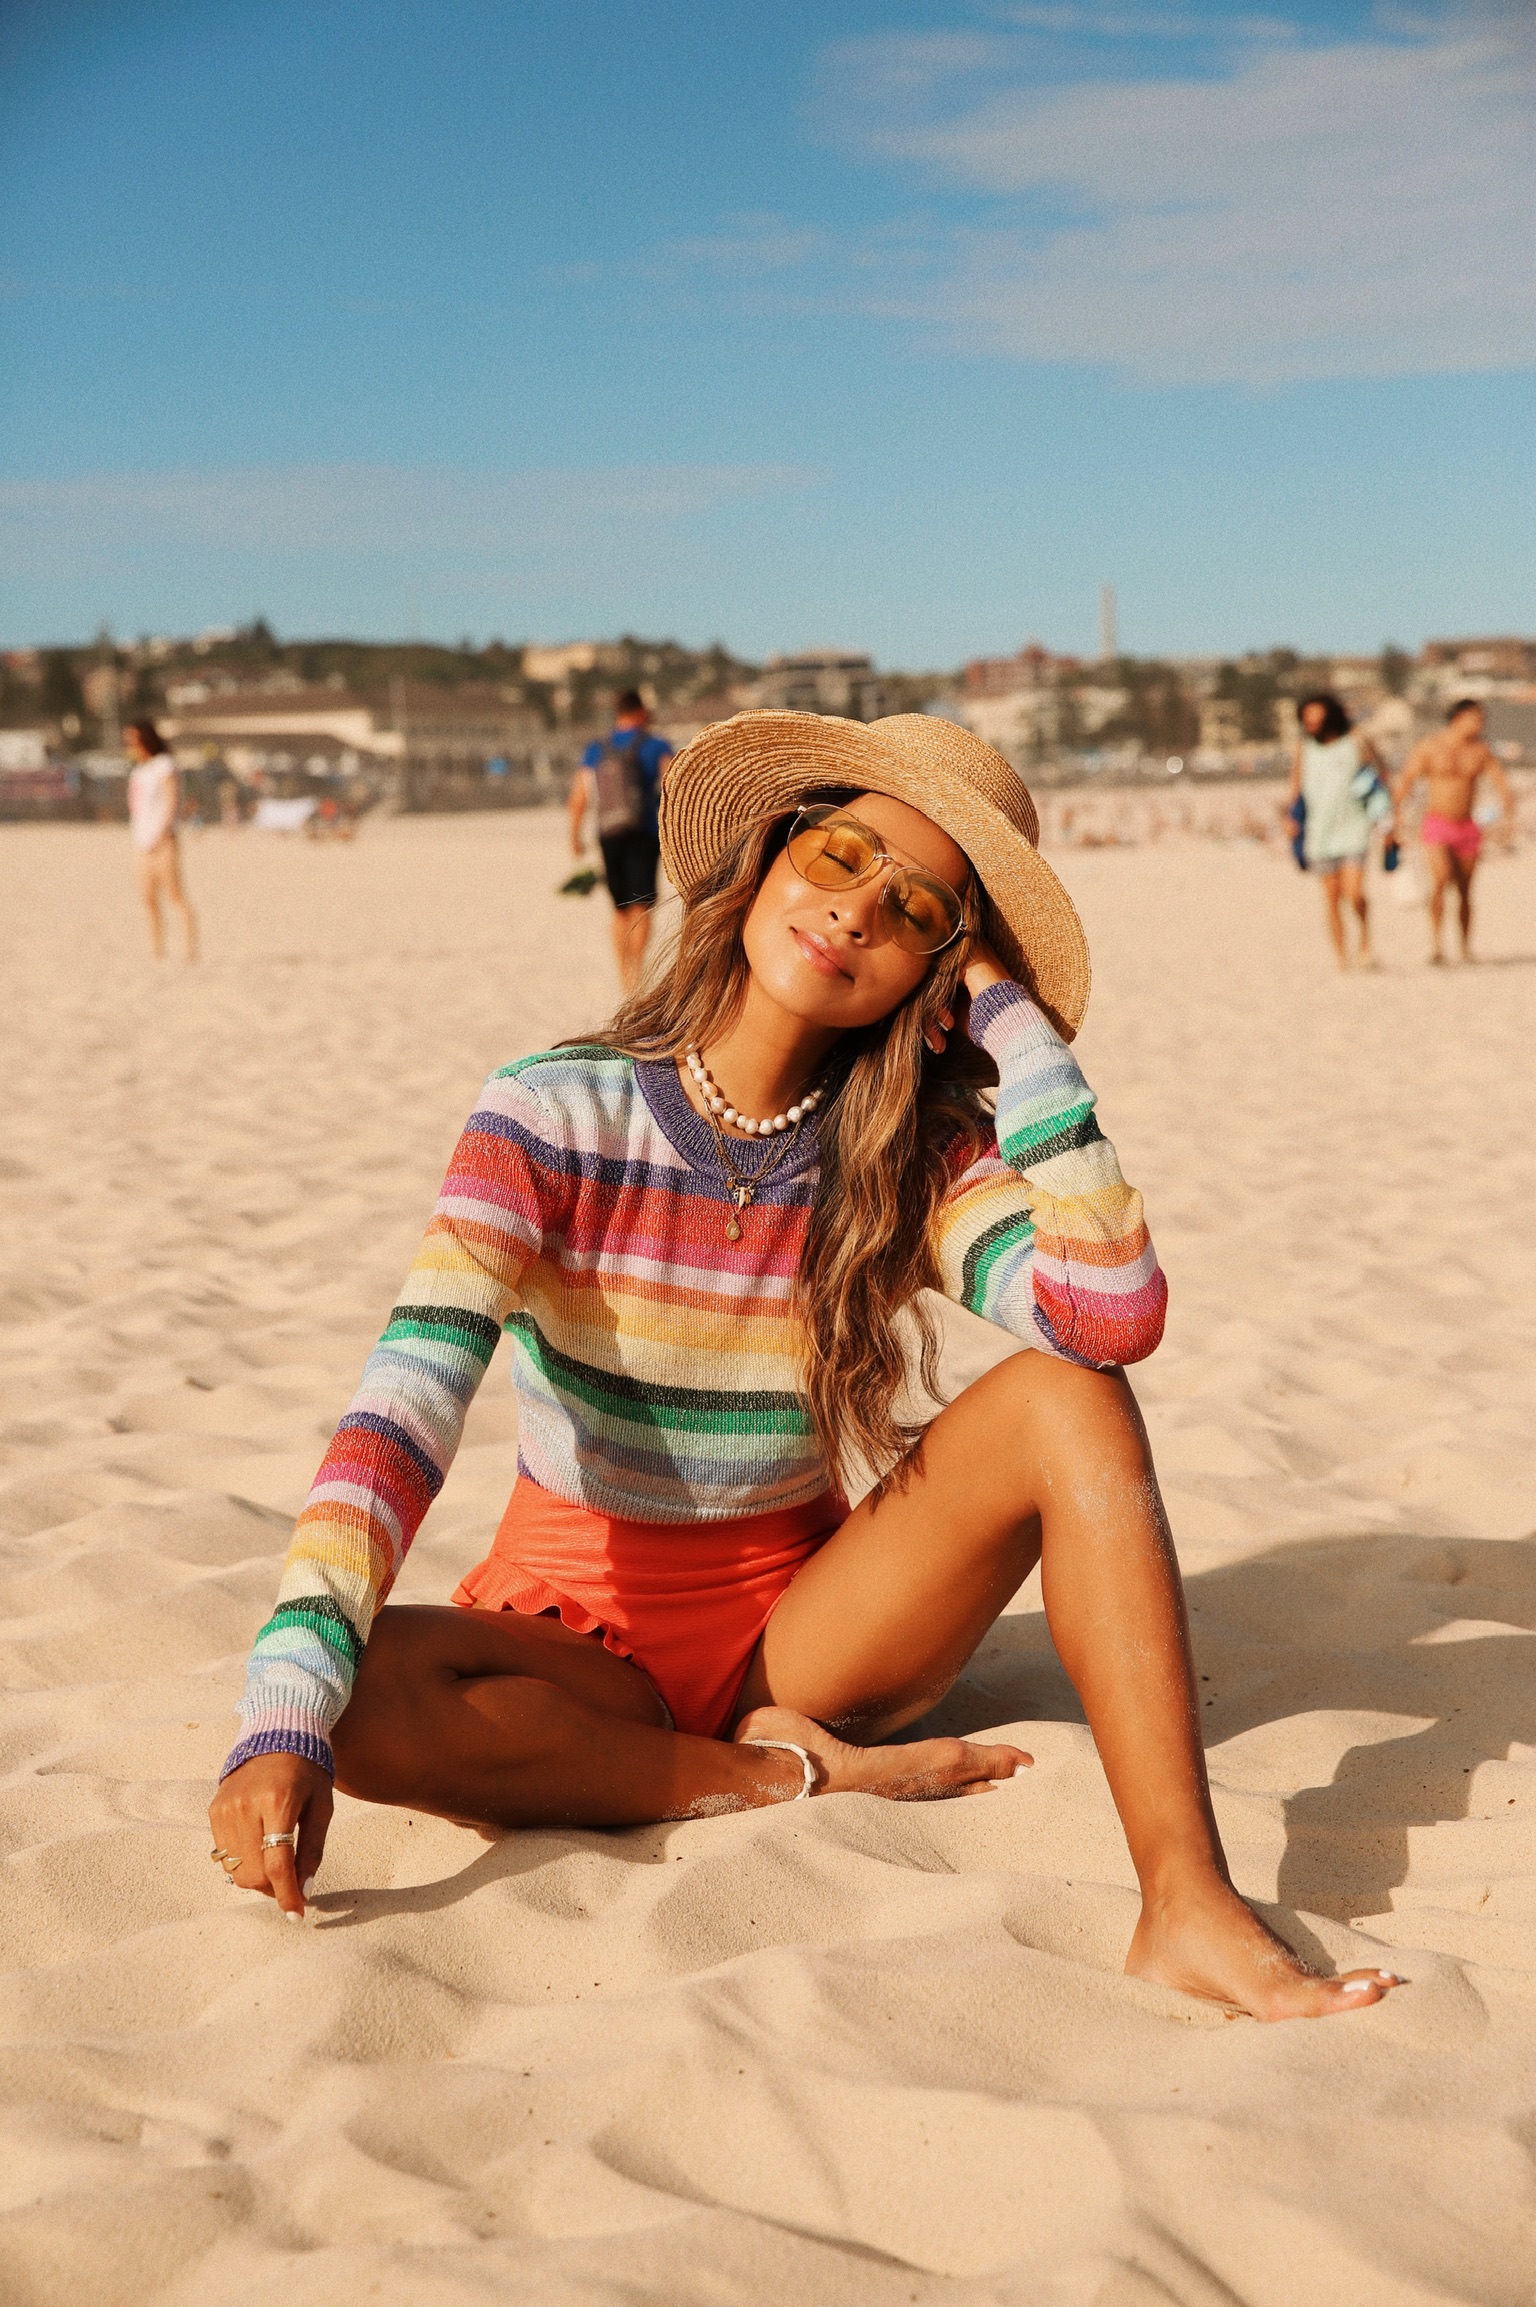 https://sincerelyjules.com/wp-content/uploads/2019/05/IMG_0026-3.jpg